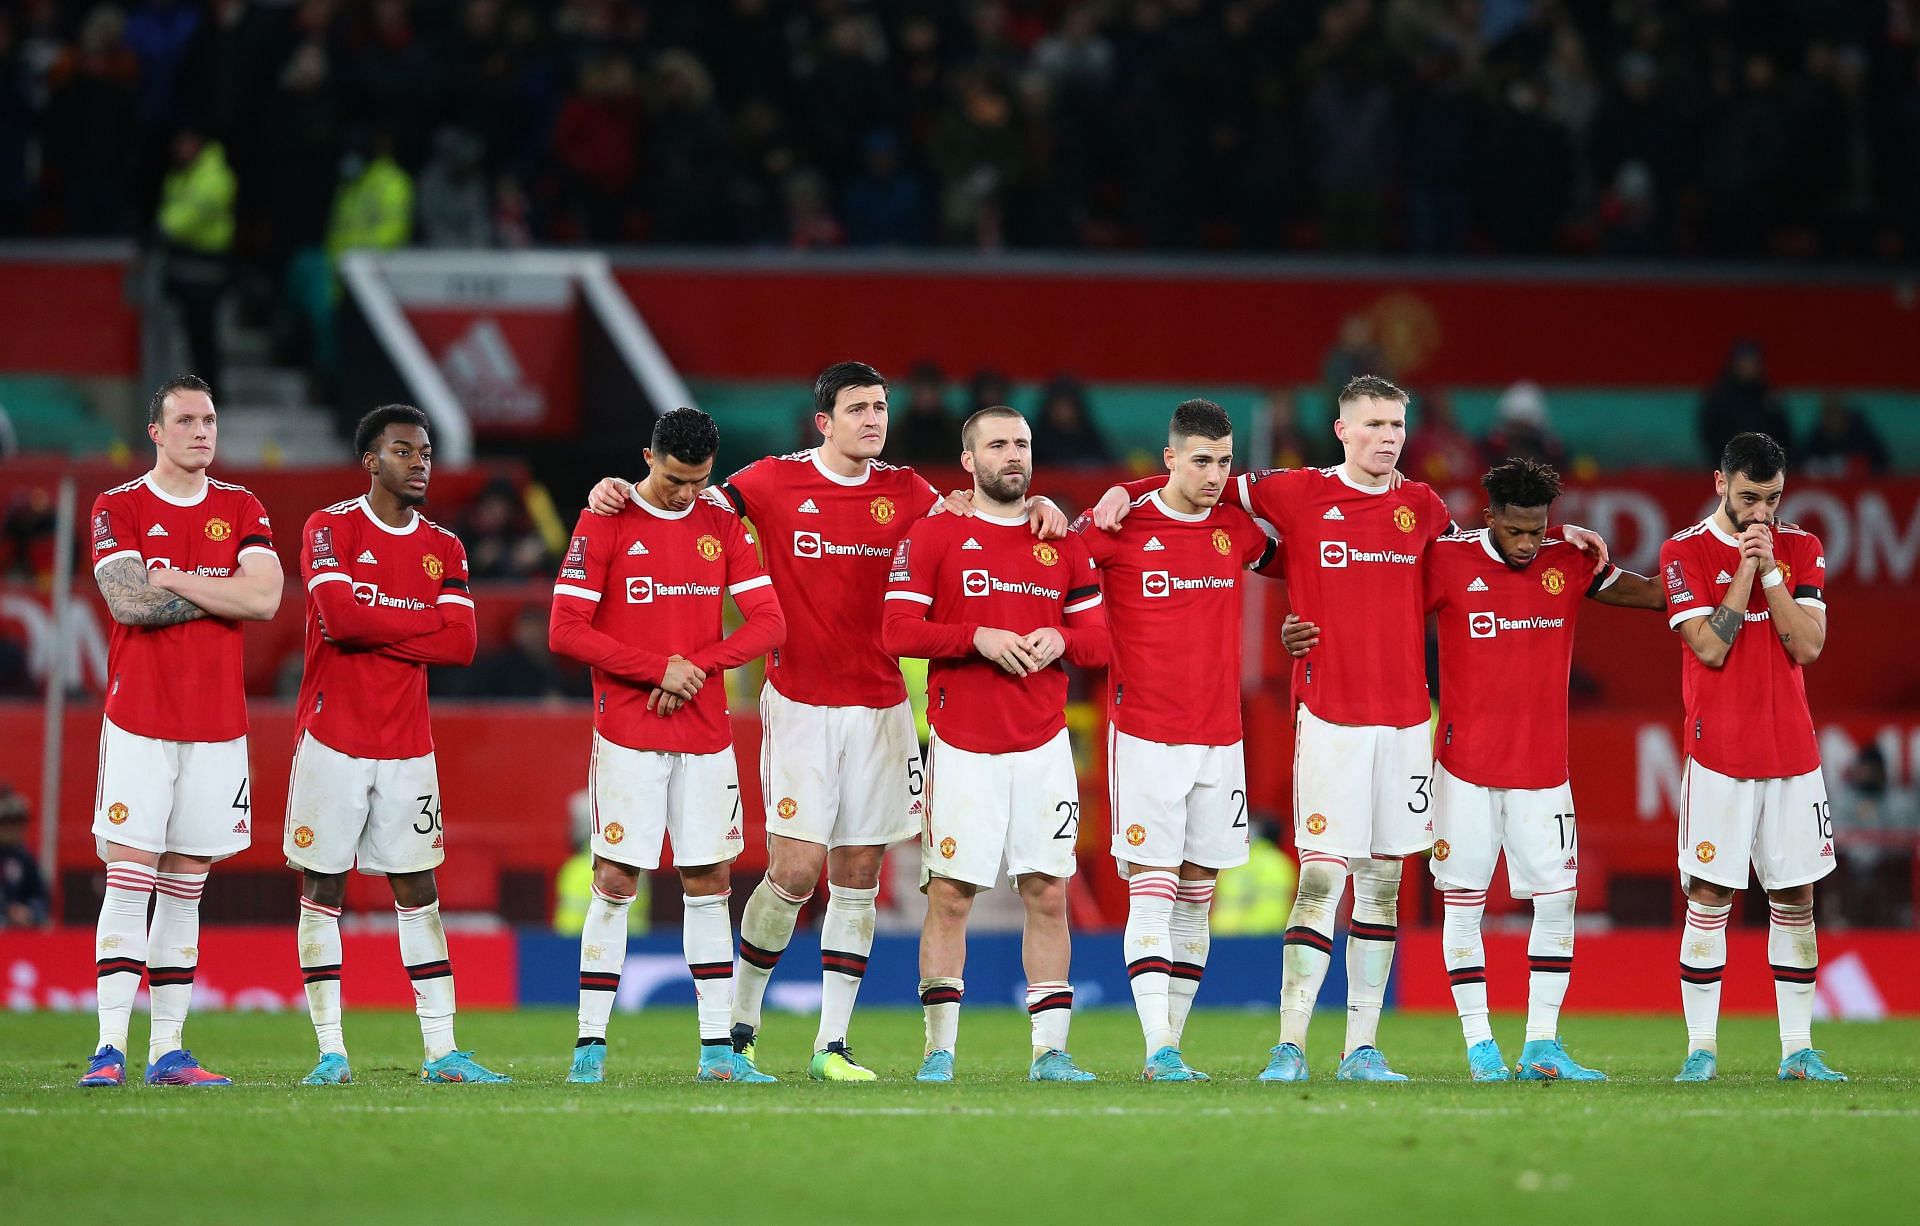 United have had a disappointing campaign.